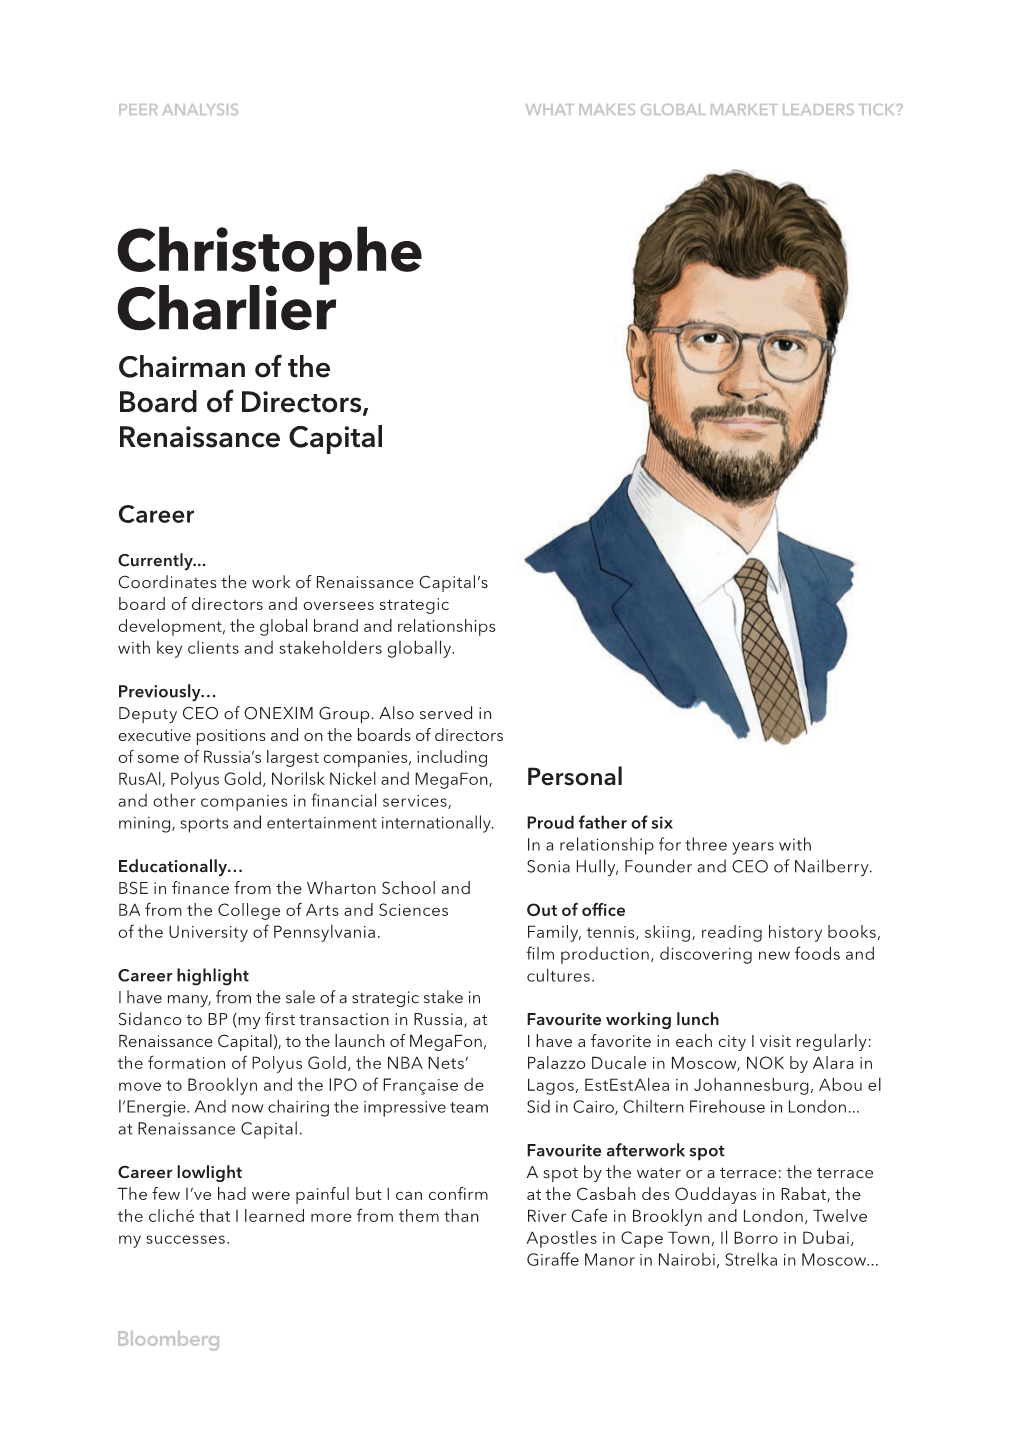 Christophe Charlier Chairman of the Board of Directors, Renaissance Capital